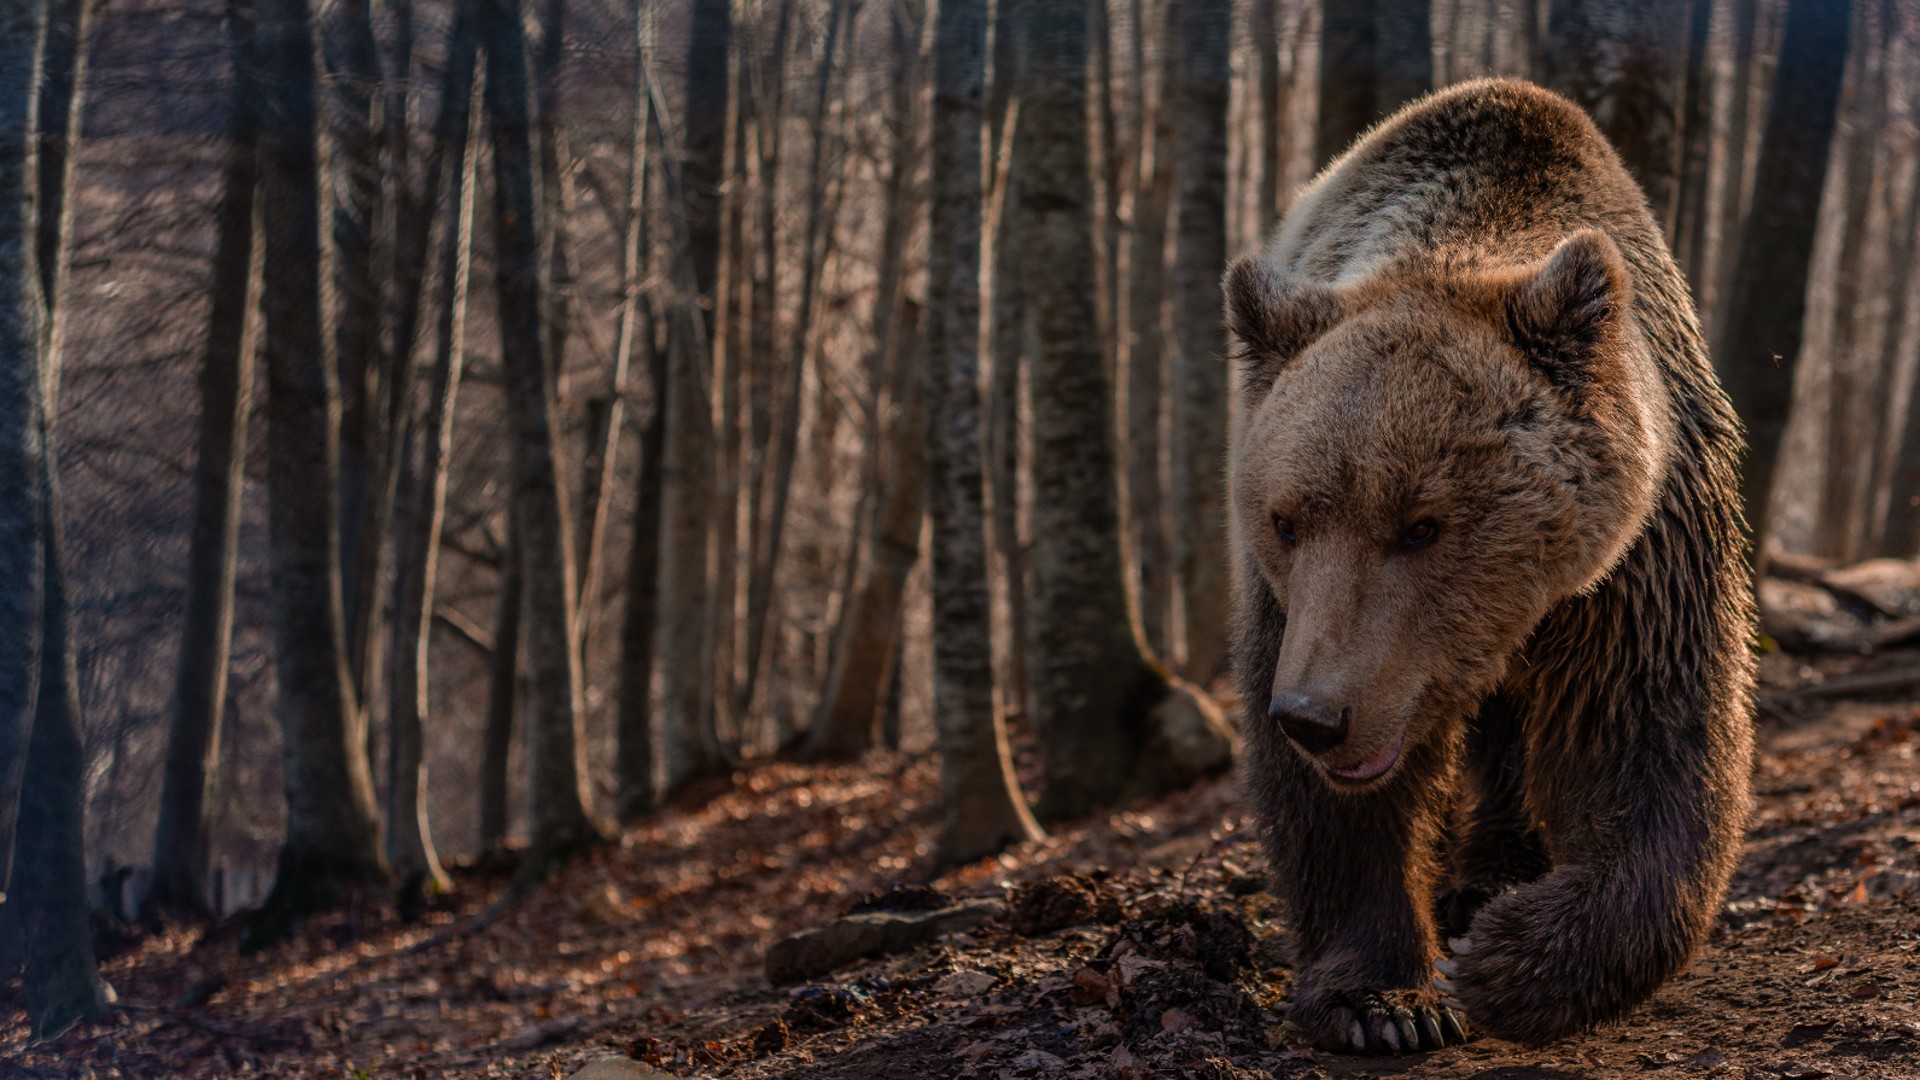 A large brown bear walking through a forest